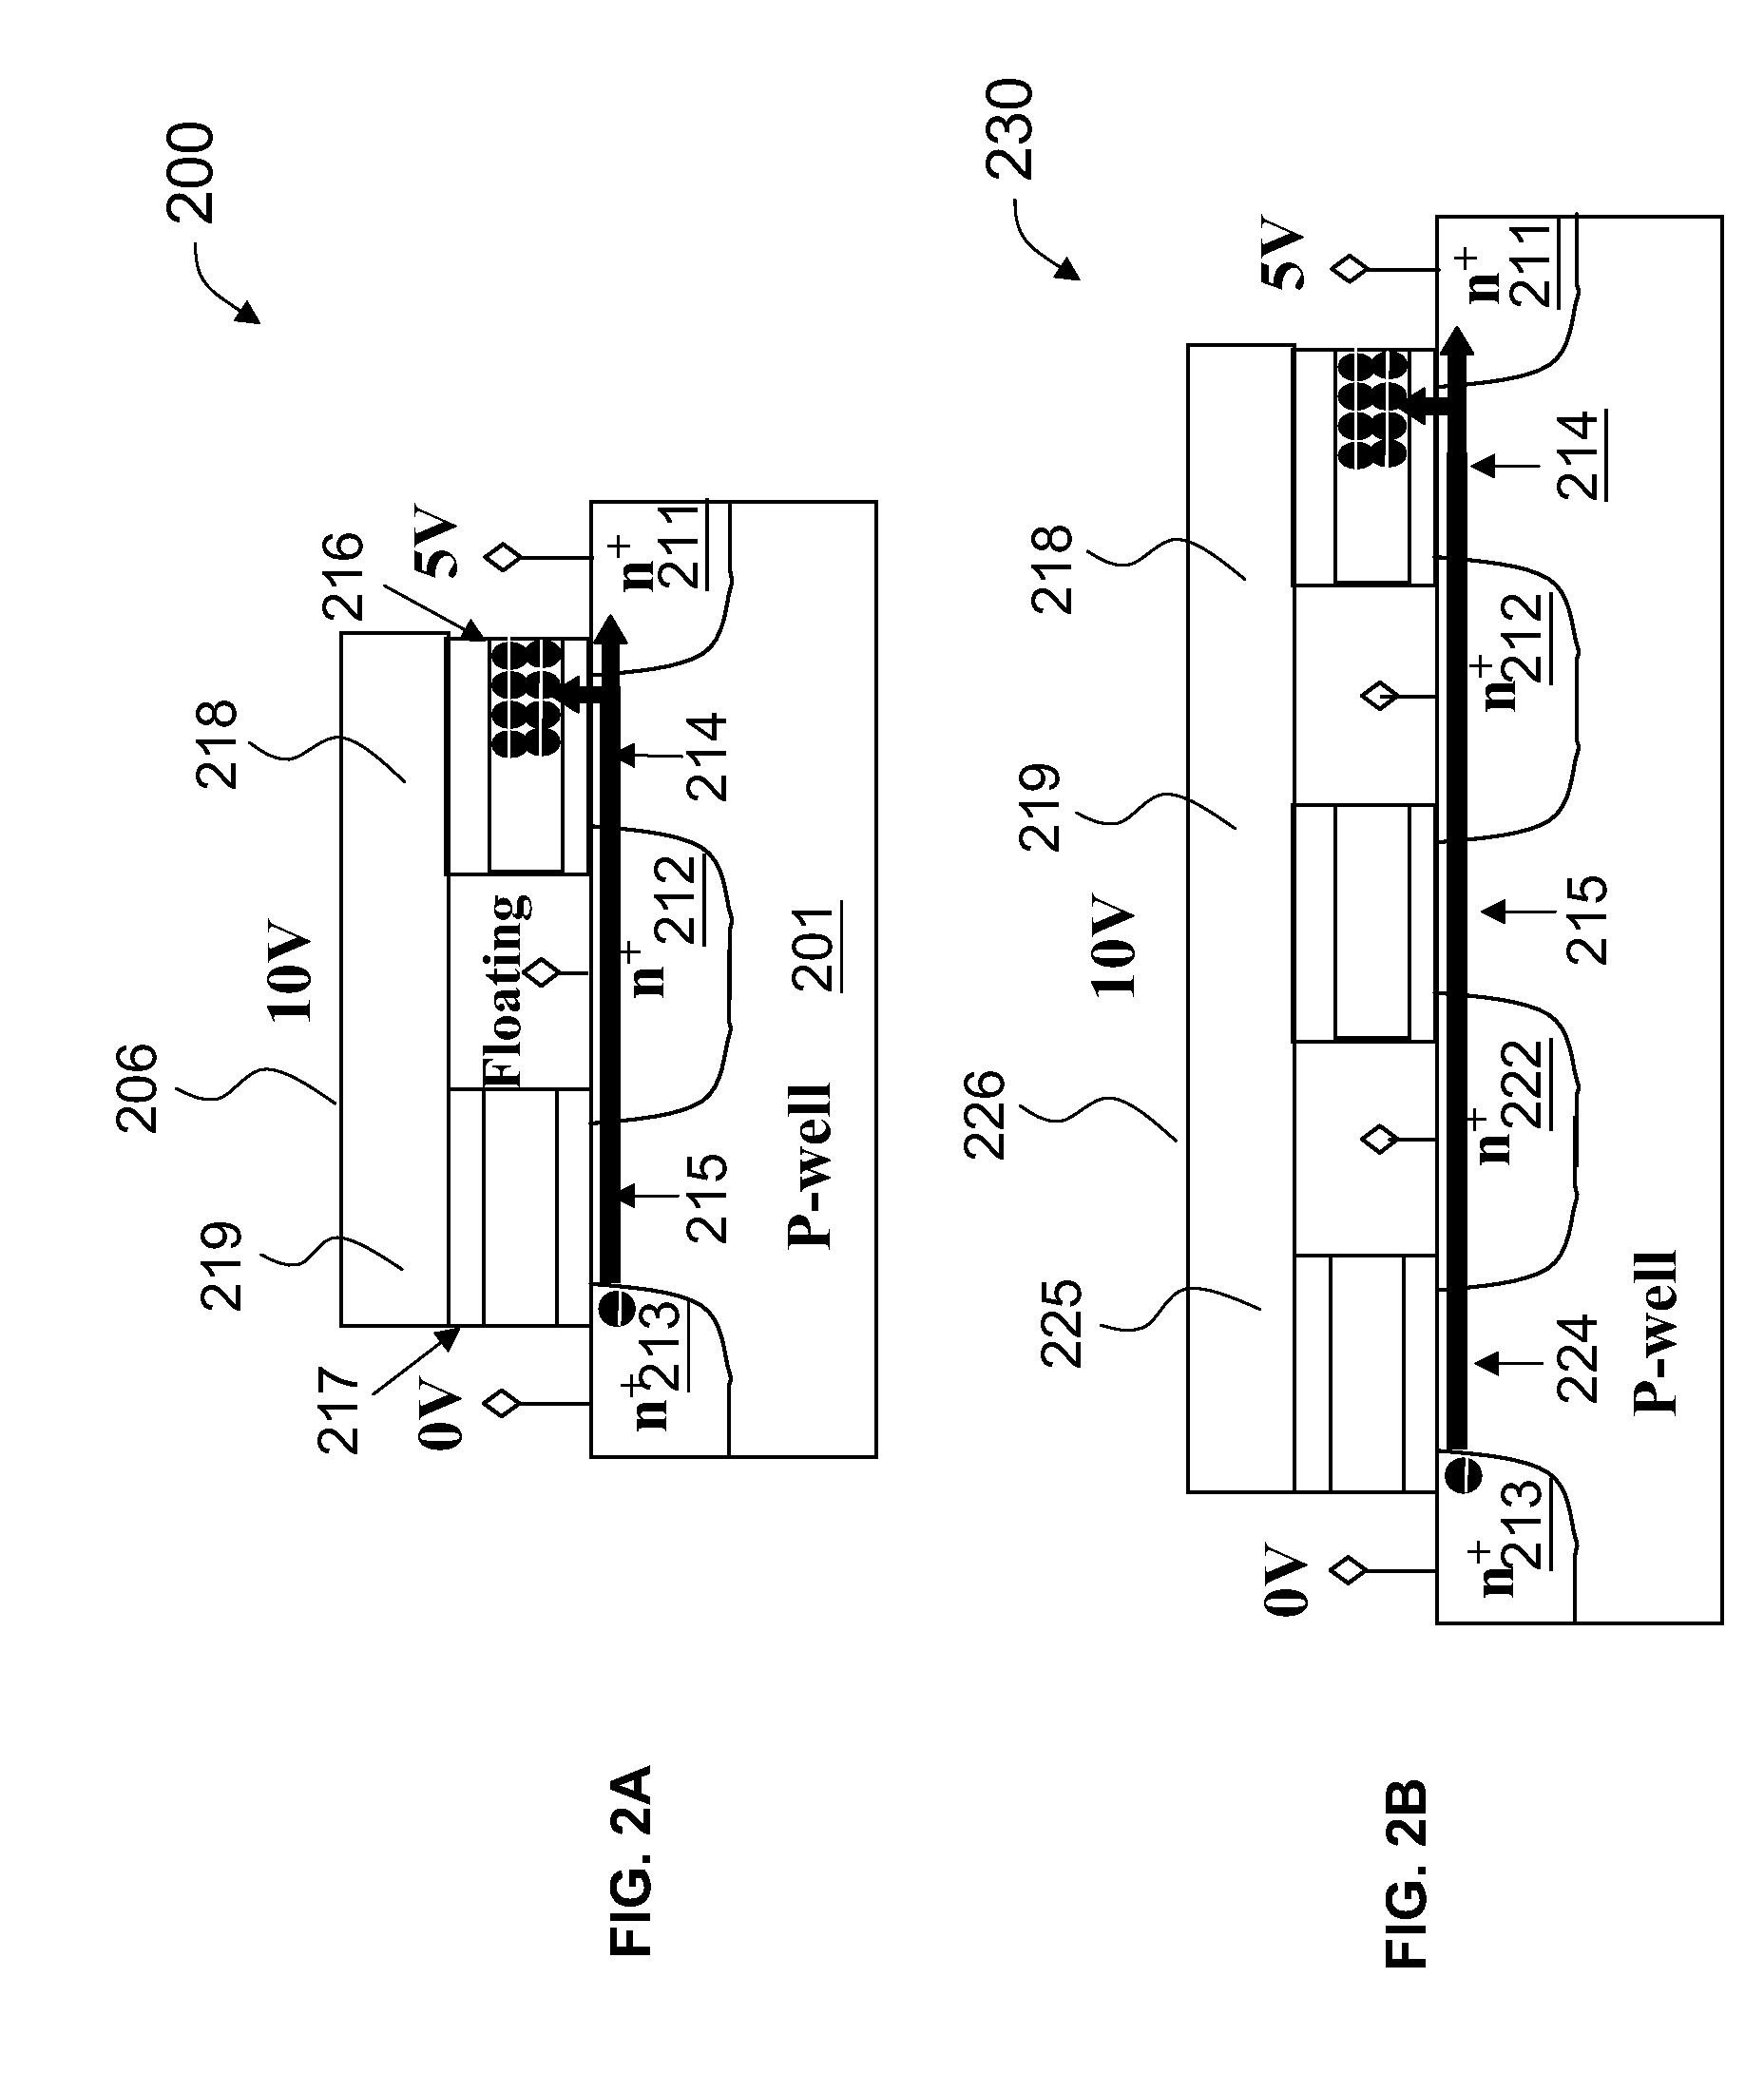 Operation methods for memory cell and array for reducing punch through leakage